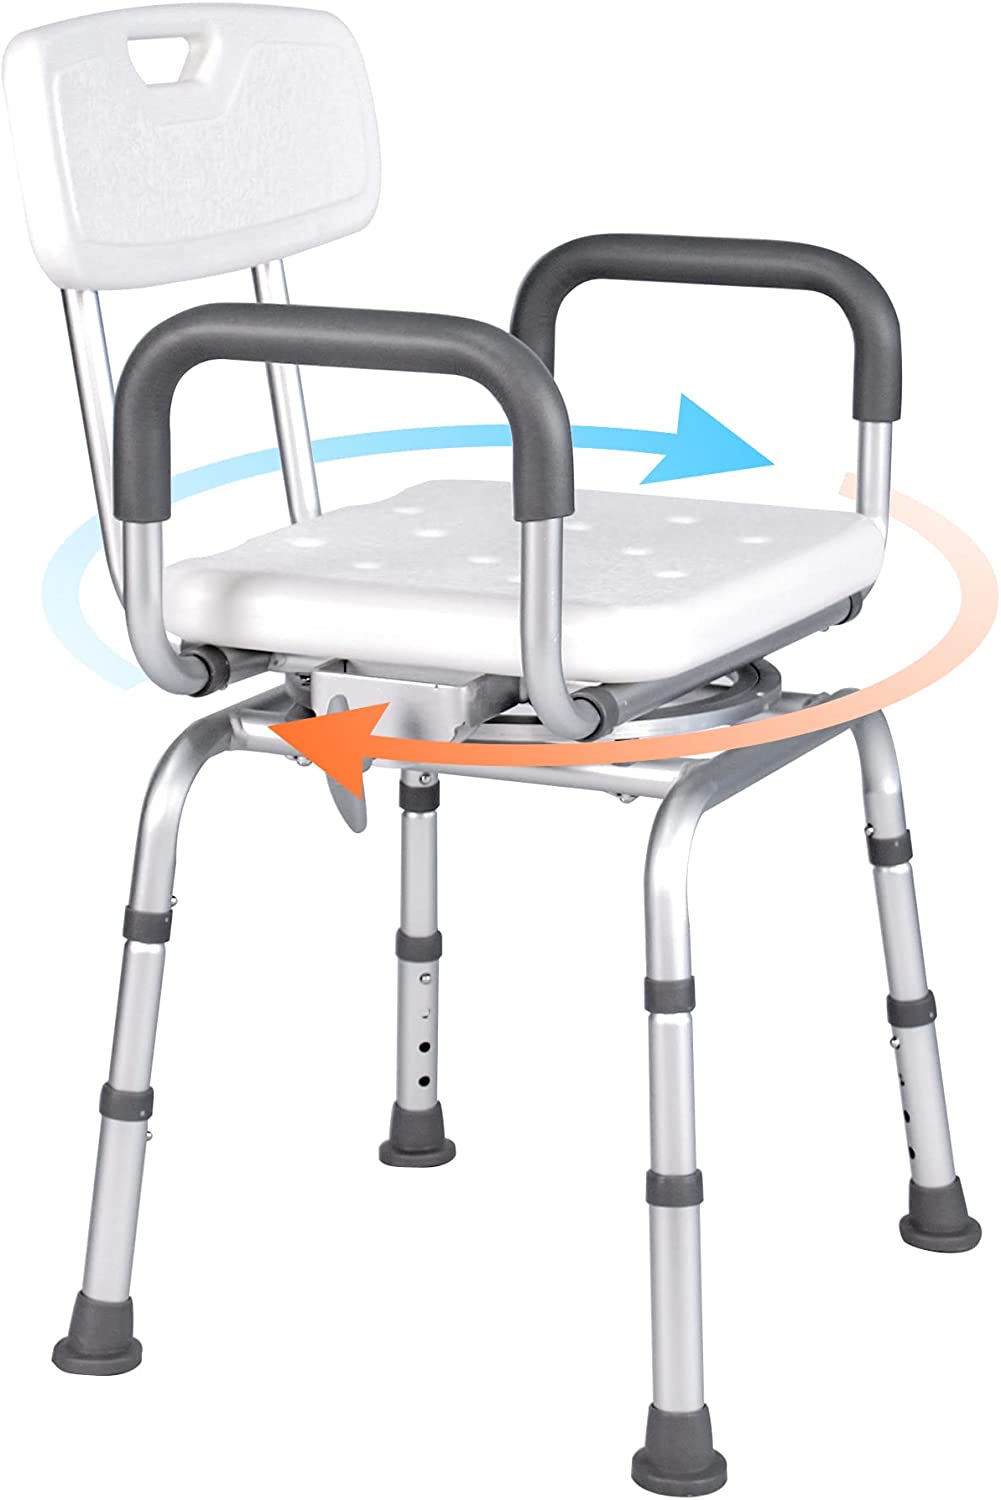 PETKABOO 360 Degree Swivel Shower Chair,Portable Seat with Armrests and Back, Adjustable Height Seat for Bathtub (White)